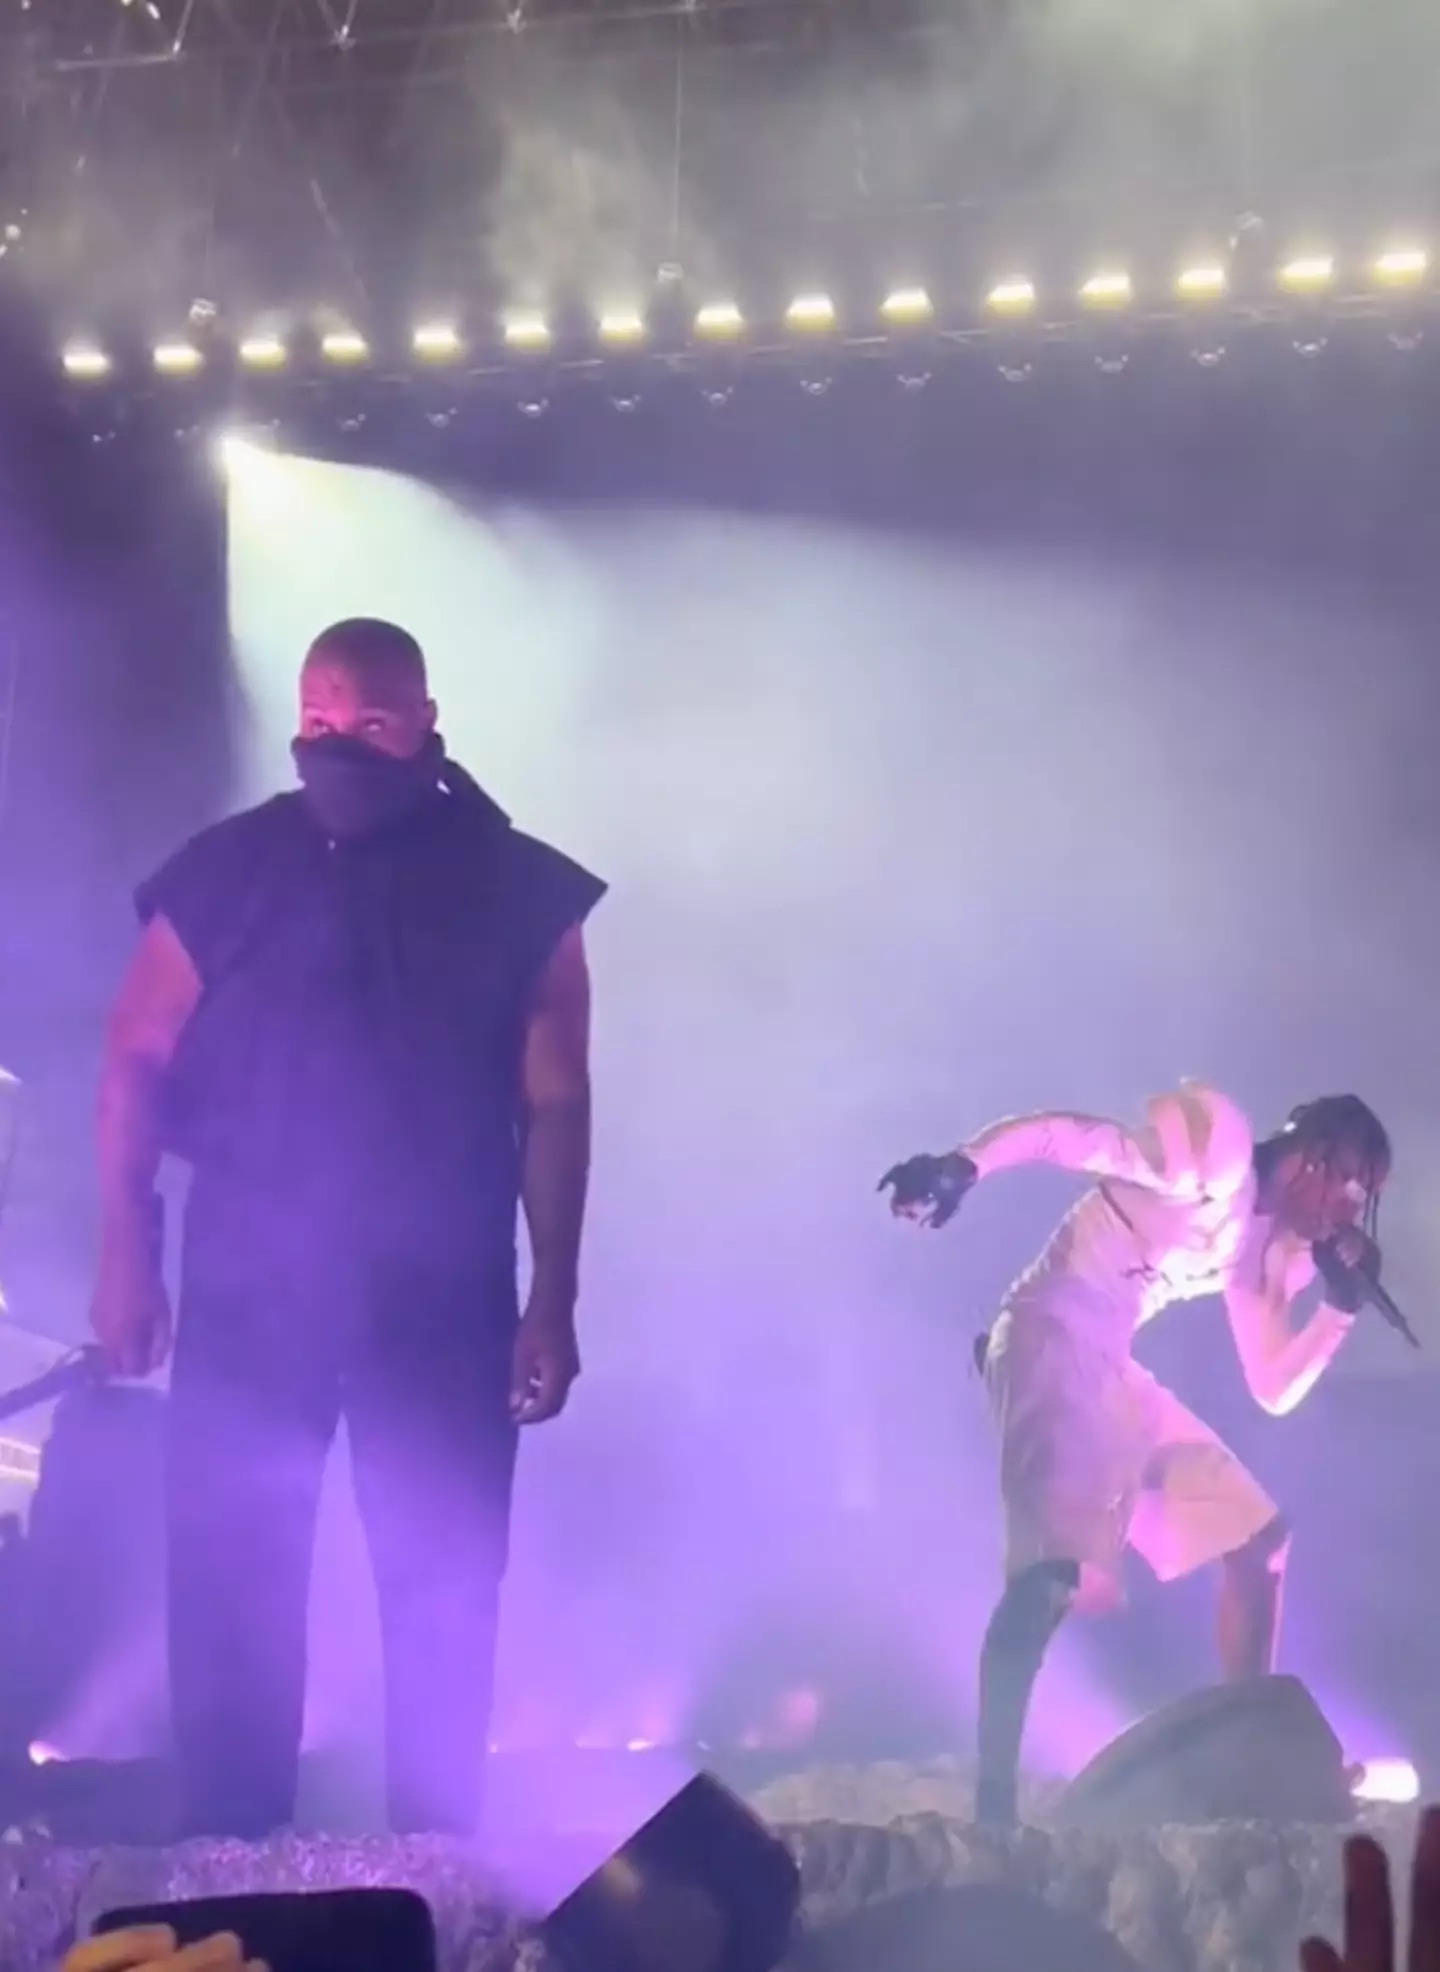 Fans were shocked to see the rapper, who legally changed his name to Ye, being introduced to the stage by Scott at his Utopia concert at the Circus Maximus.